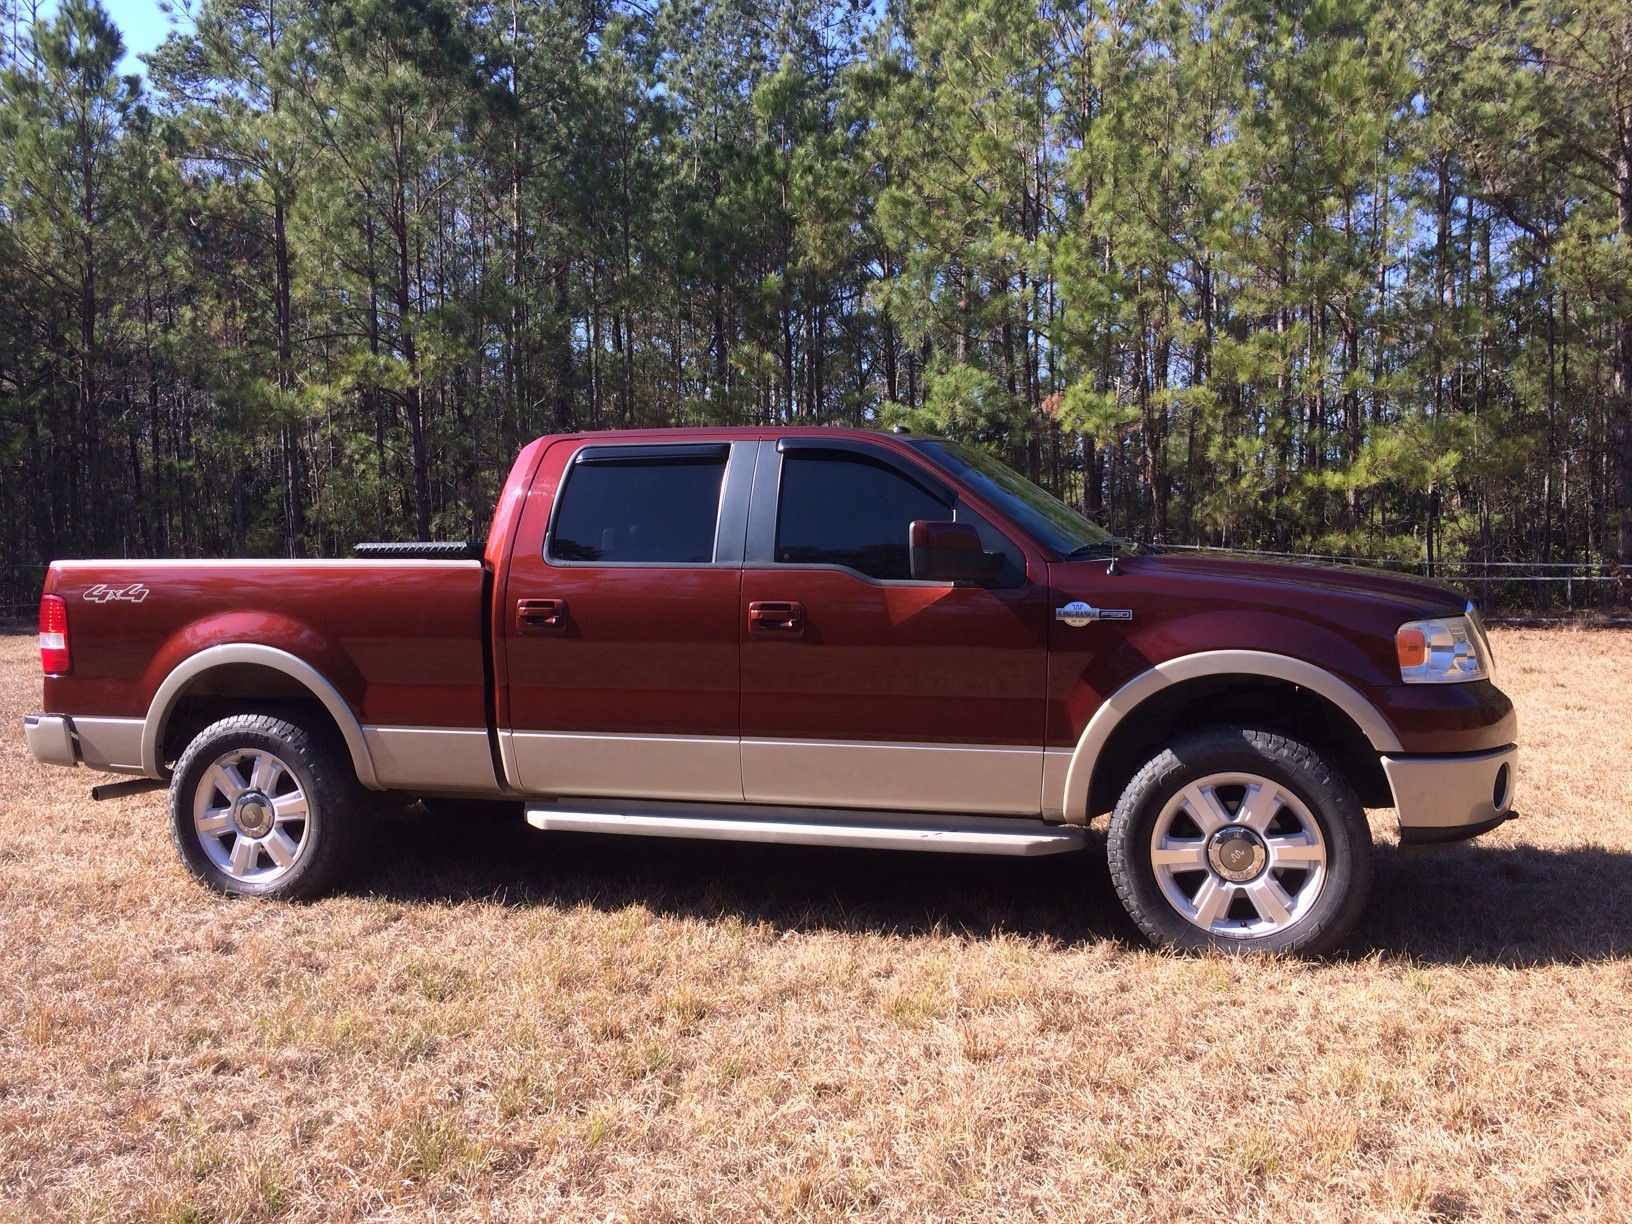 SOLD - 2007 Ford F150 King Ranch Crew Cab 4WD - SOLD!! - The Hull Truth 2007 Ford F150 5.4 Triton Towing Capacity